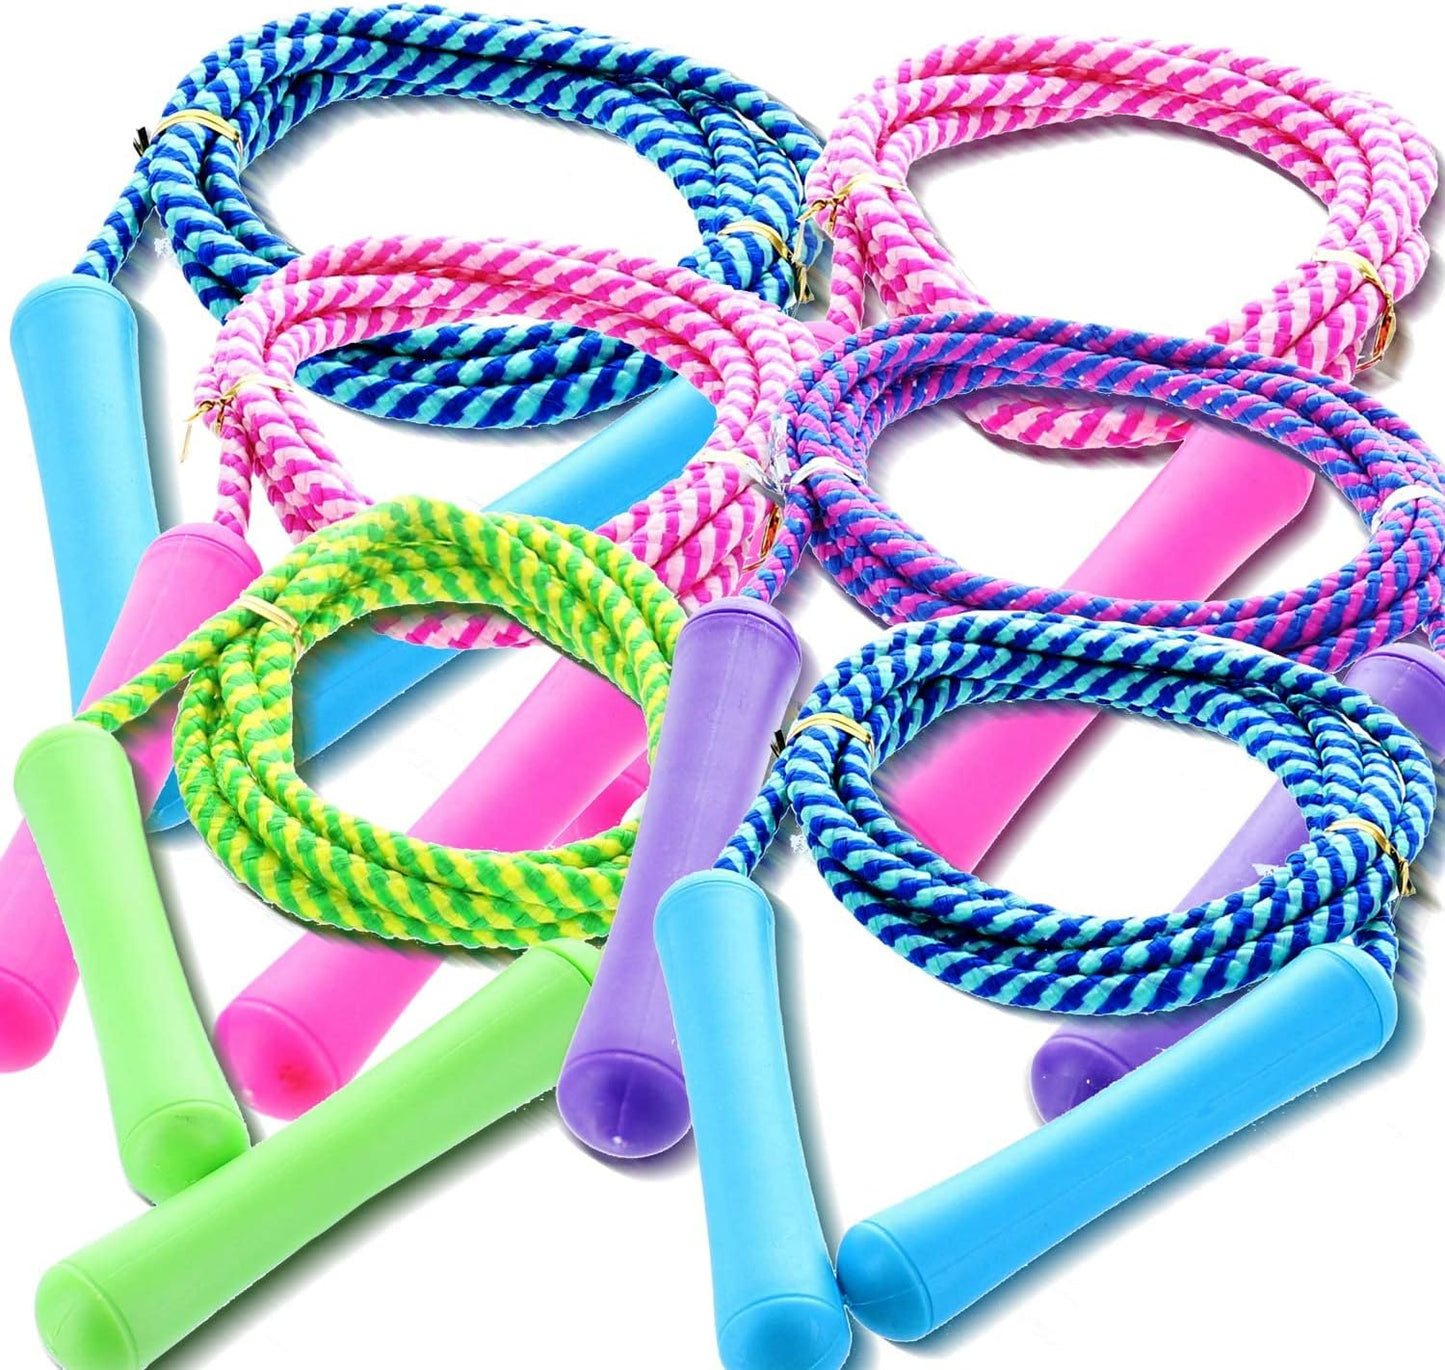 GIFTEXPRESS Adjustable Size Colorful Jump Rope for Kids and Teens, Assorted Colors (Pack of 6)